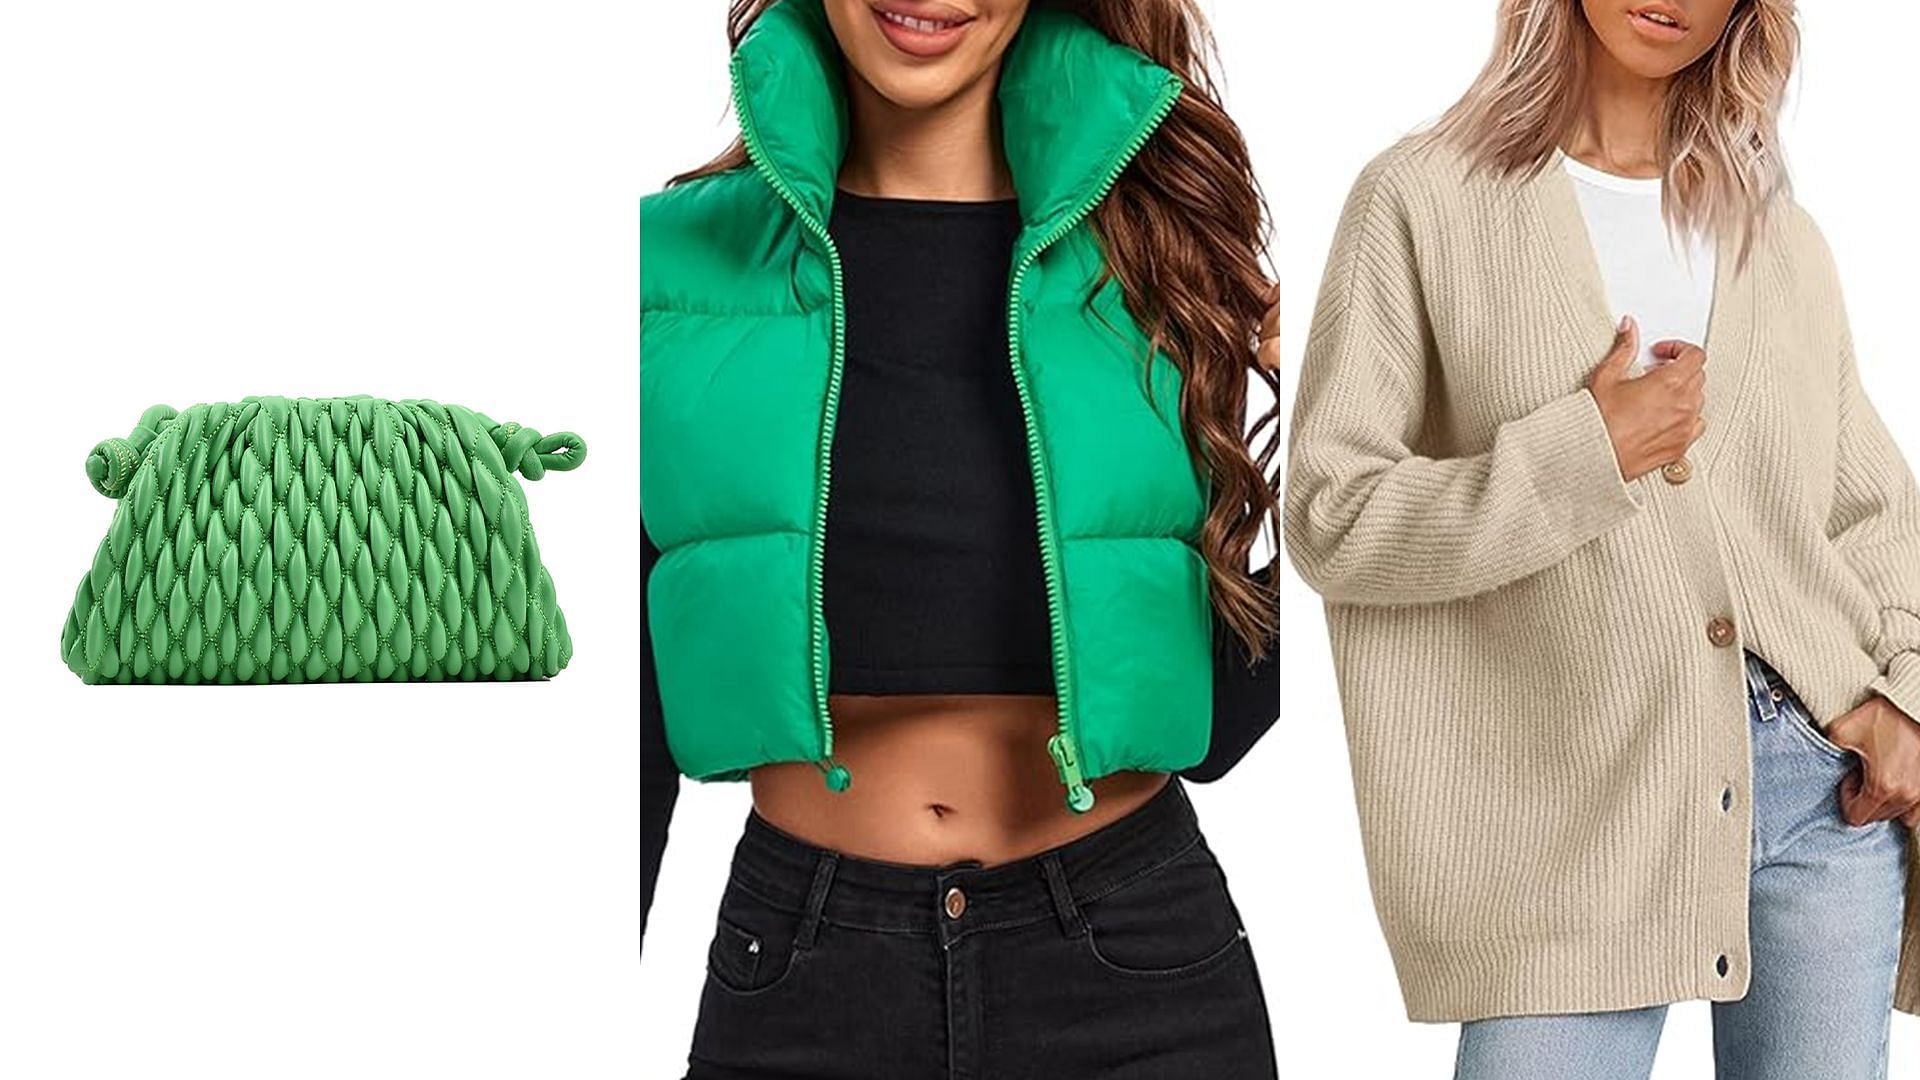 Black Friday Clothing Deals 2023 - Forbes Vetted